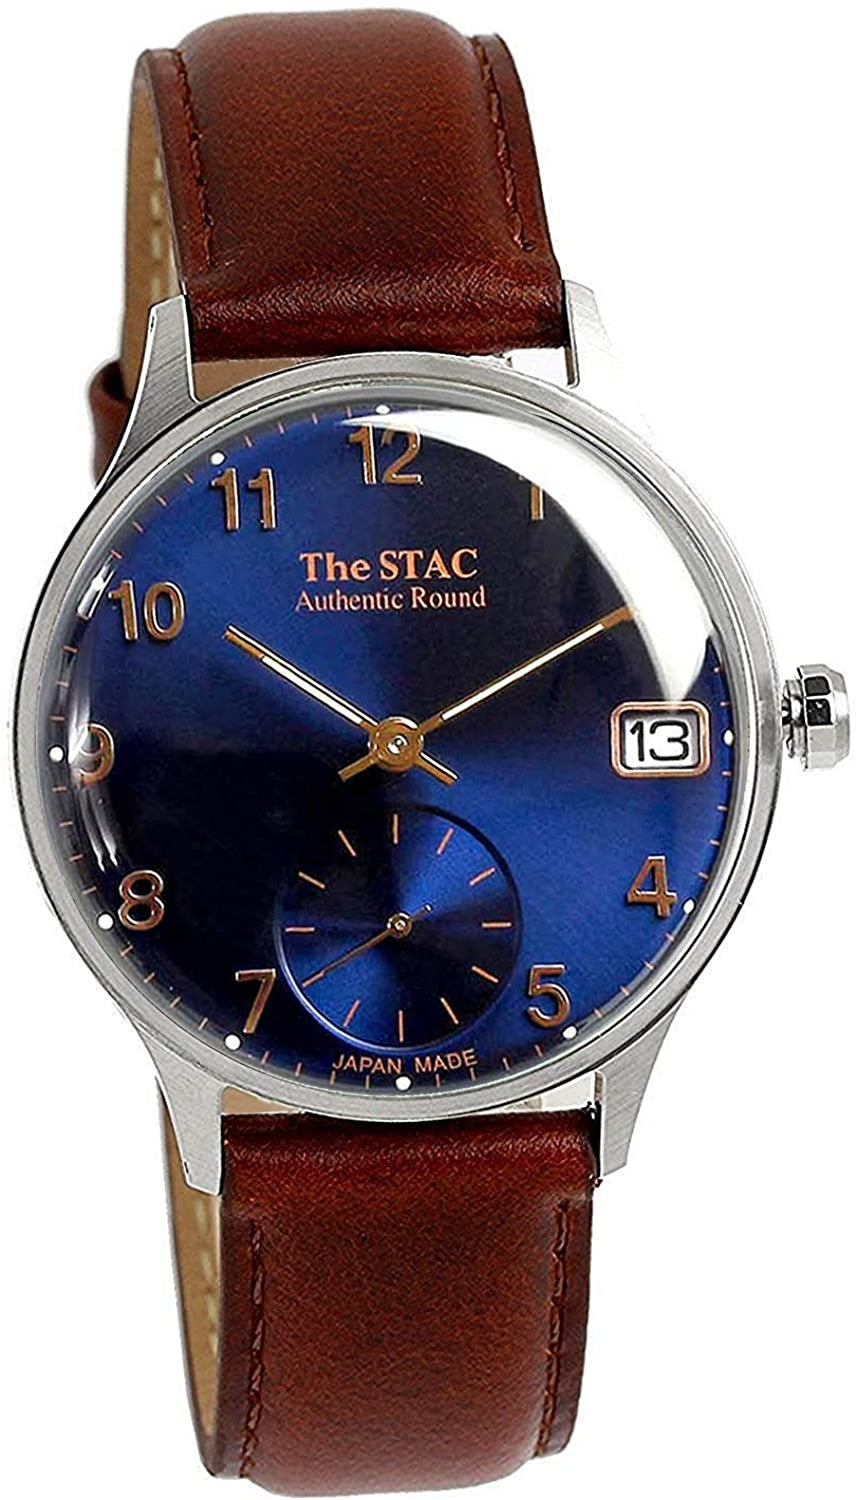 Authentic Round 36mm Arabic numerals Blue dial Brown smooth leather